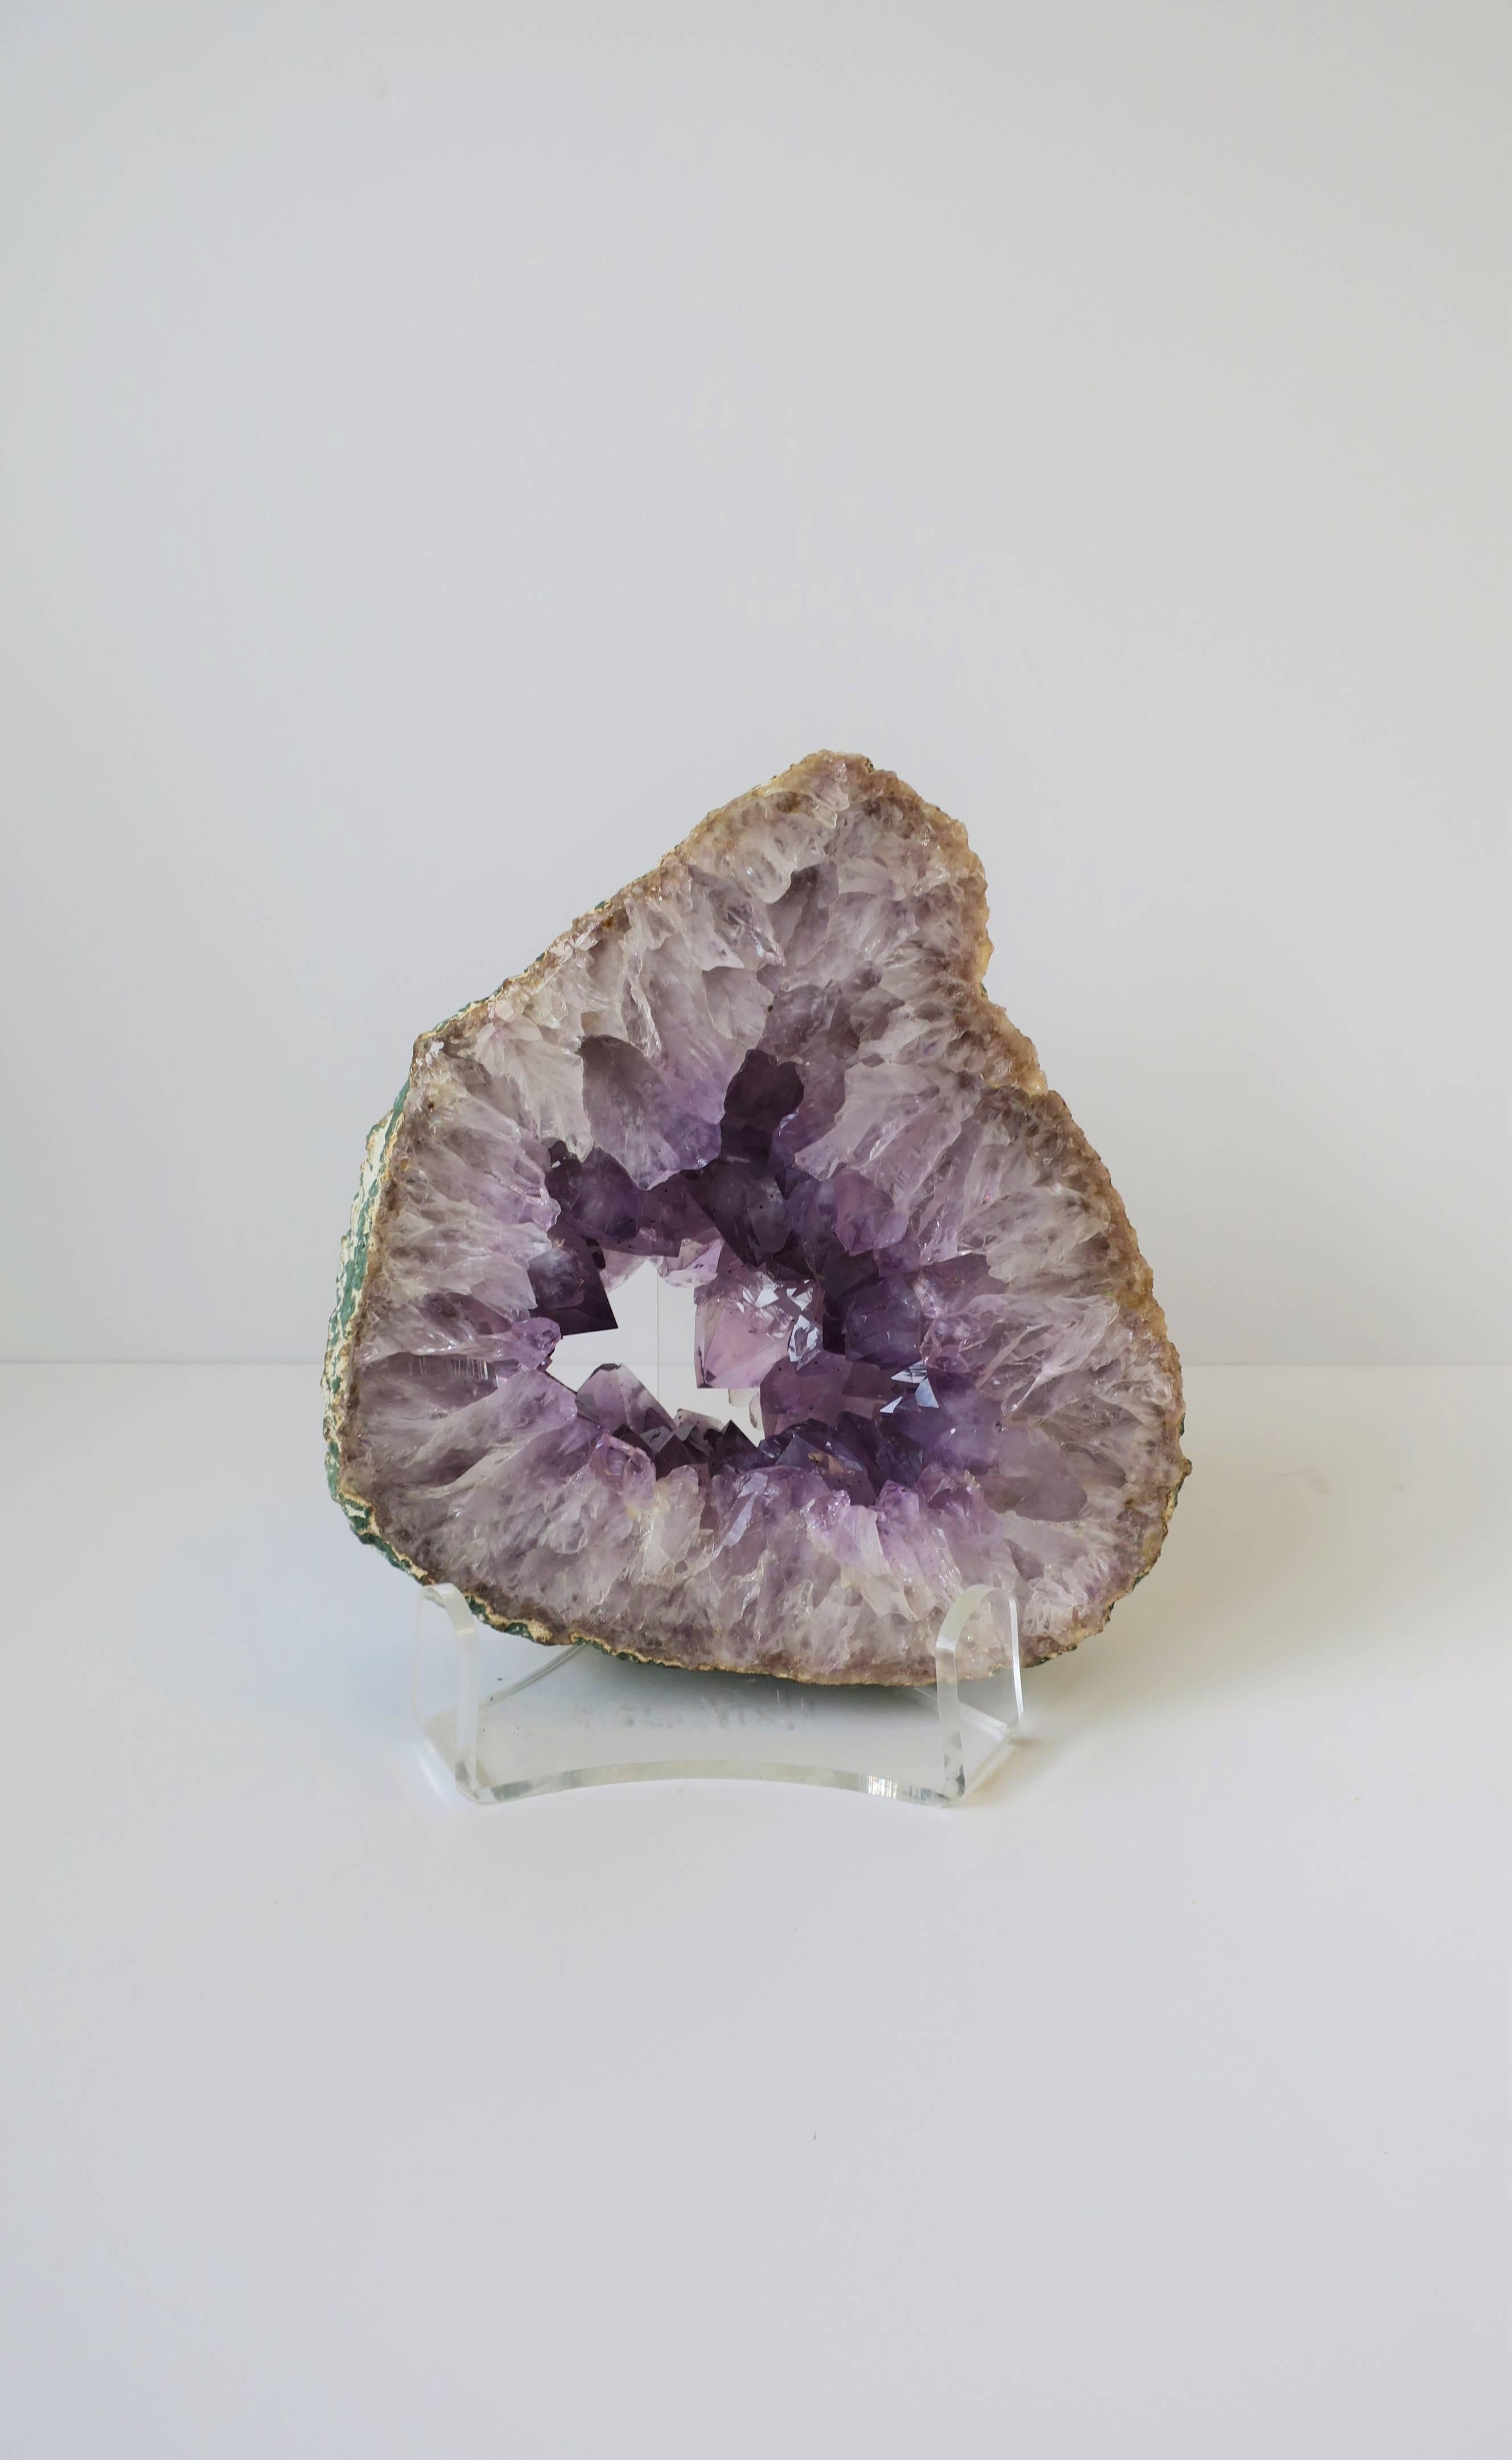 A beautiful and relatively large natural purple amethyst crystal sculpture. Acrylic base included. 

Piece measures: 
2.75 in. thick 
Approximately 8.5 in. - 9 in. in diameter

Item available here online. By request, item can be made available by